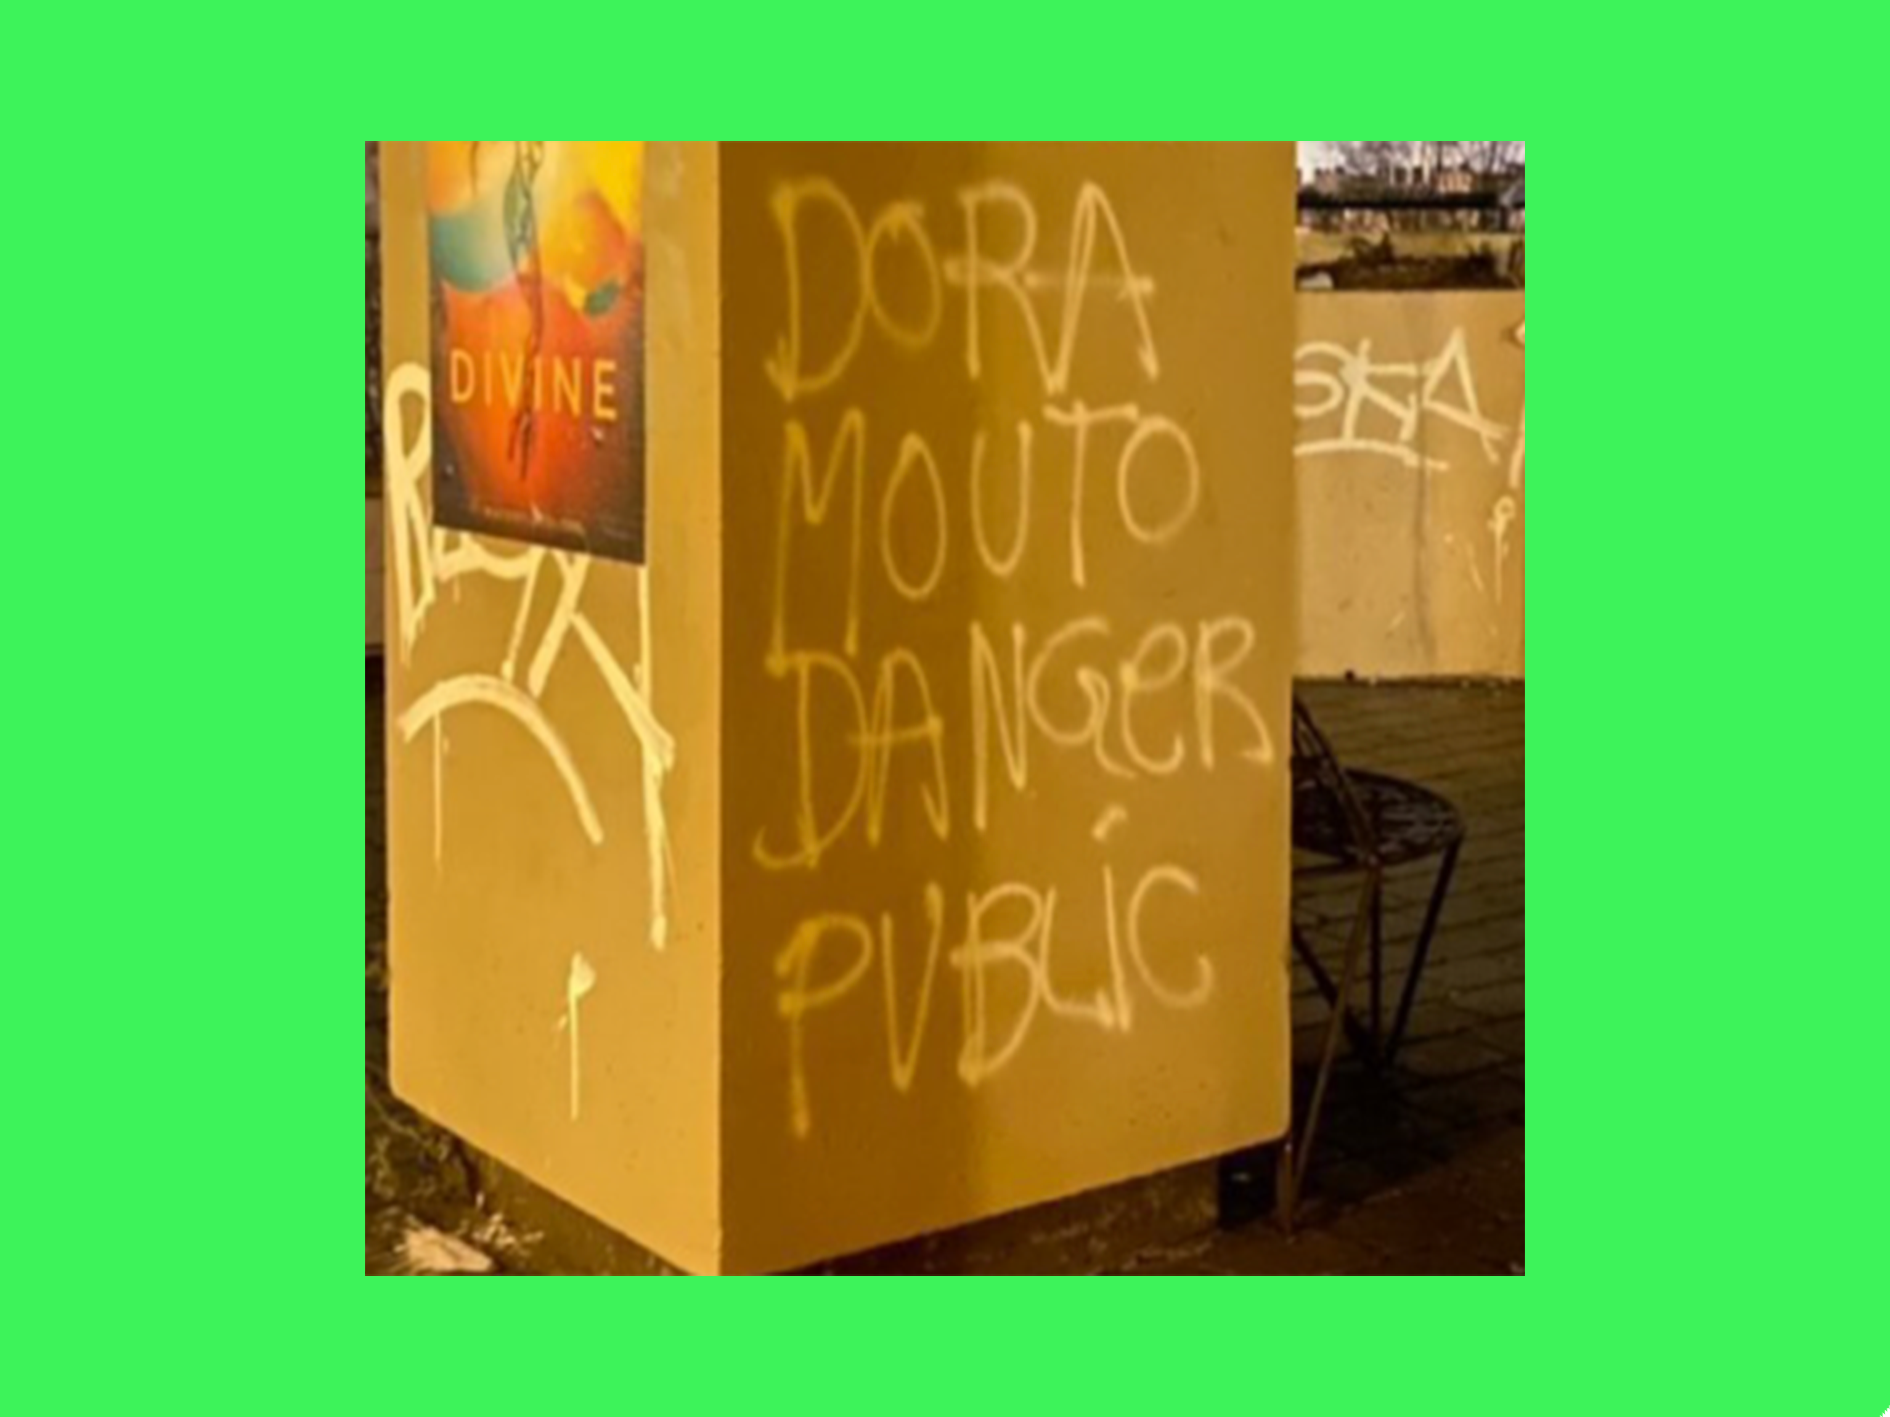 Violent messages in public spaces (graffiti and signs)